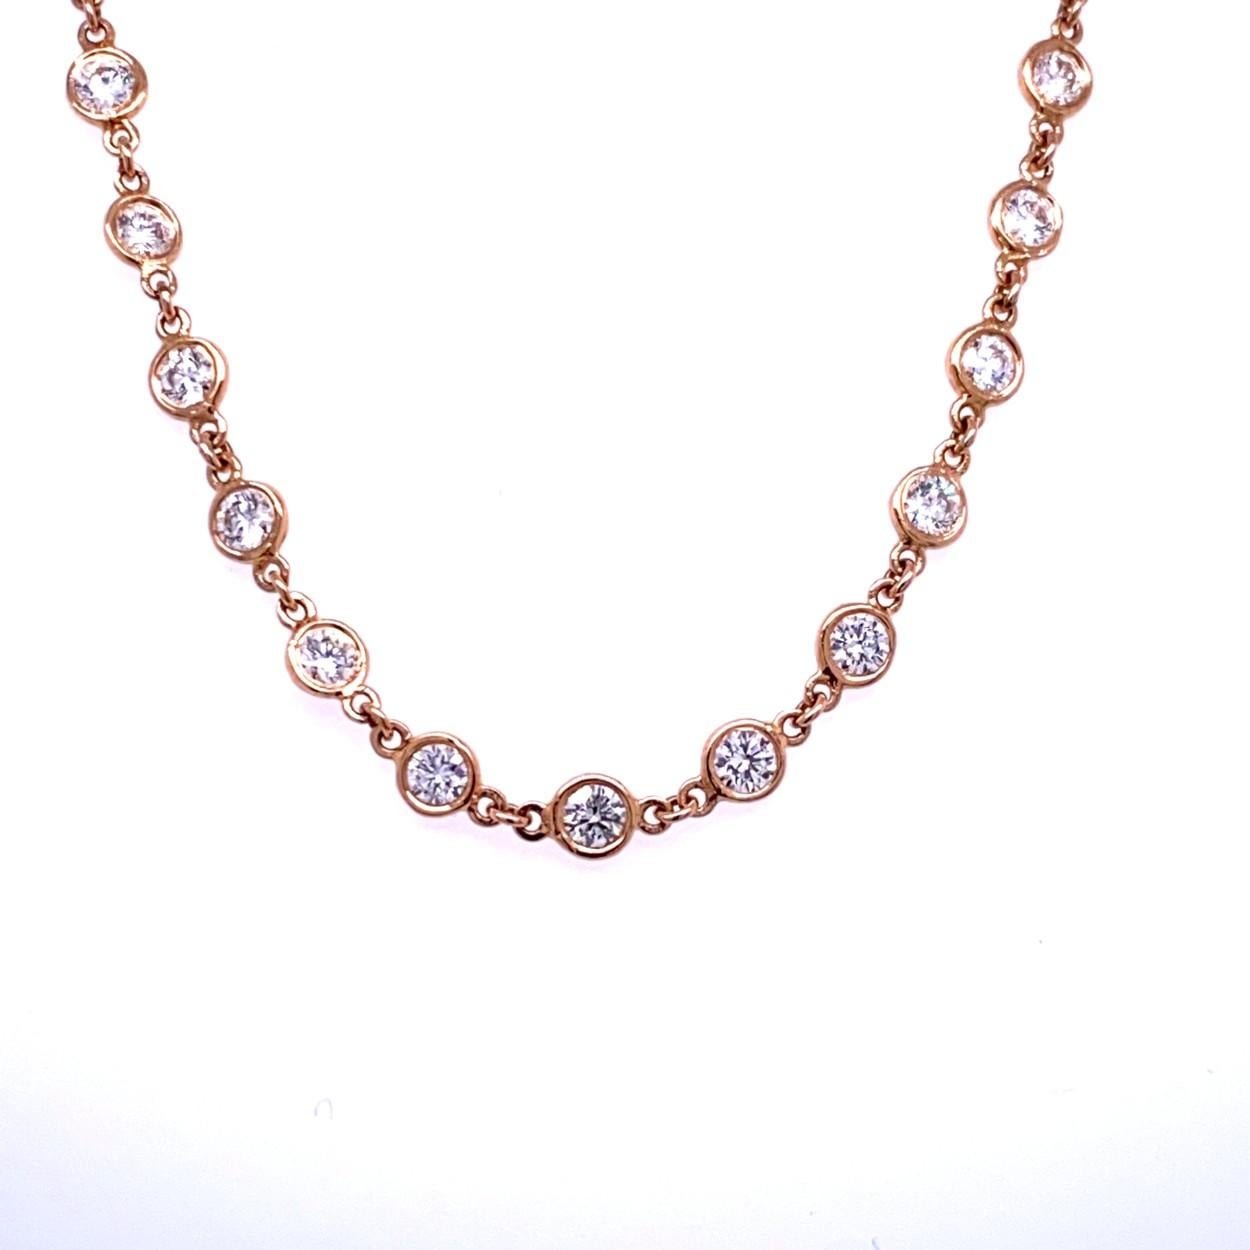 This Diamond Necklace consists of 61 Links Bezel Set 2.8mm Round Brilliant diamonds set in 18K Gold.   Available in White, Yellow, and Rose Color.
Total Weight of diamonds: 5.32 Ct 
Total Weight of bracelet: 8.7 gr